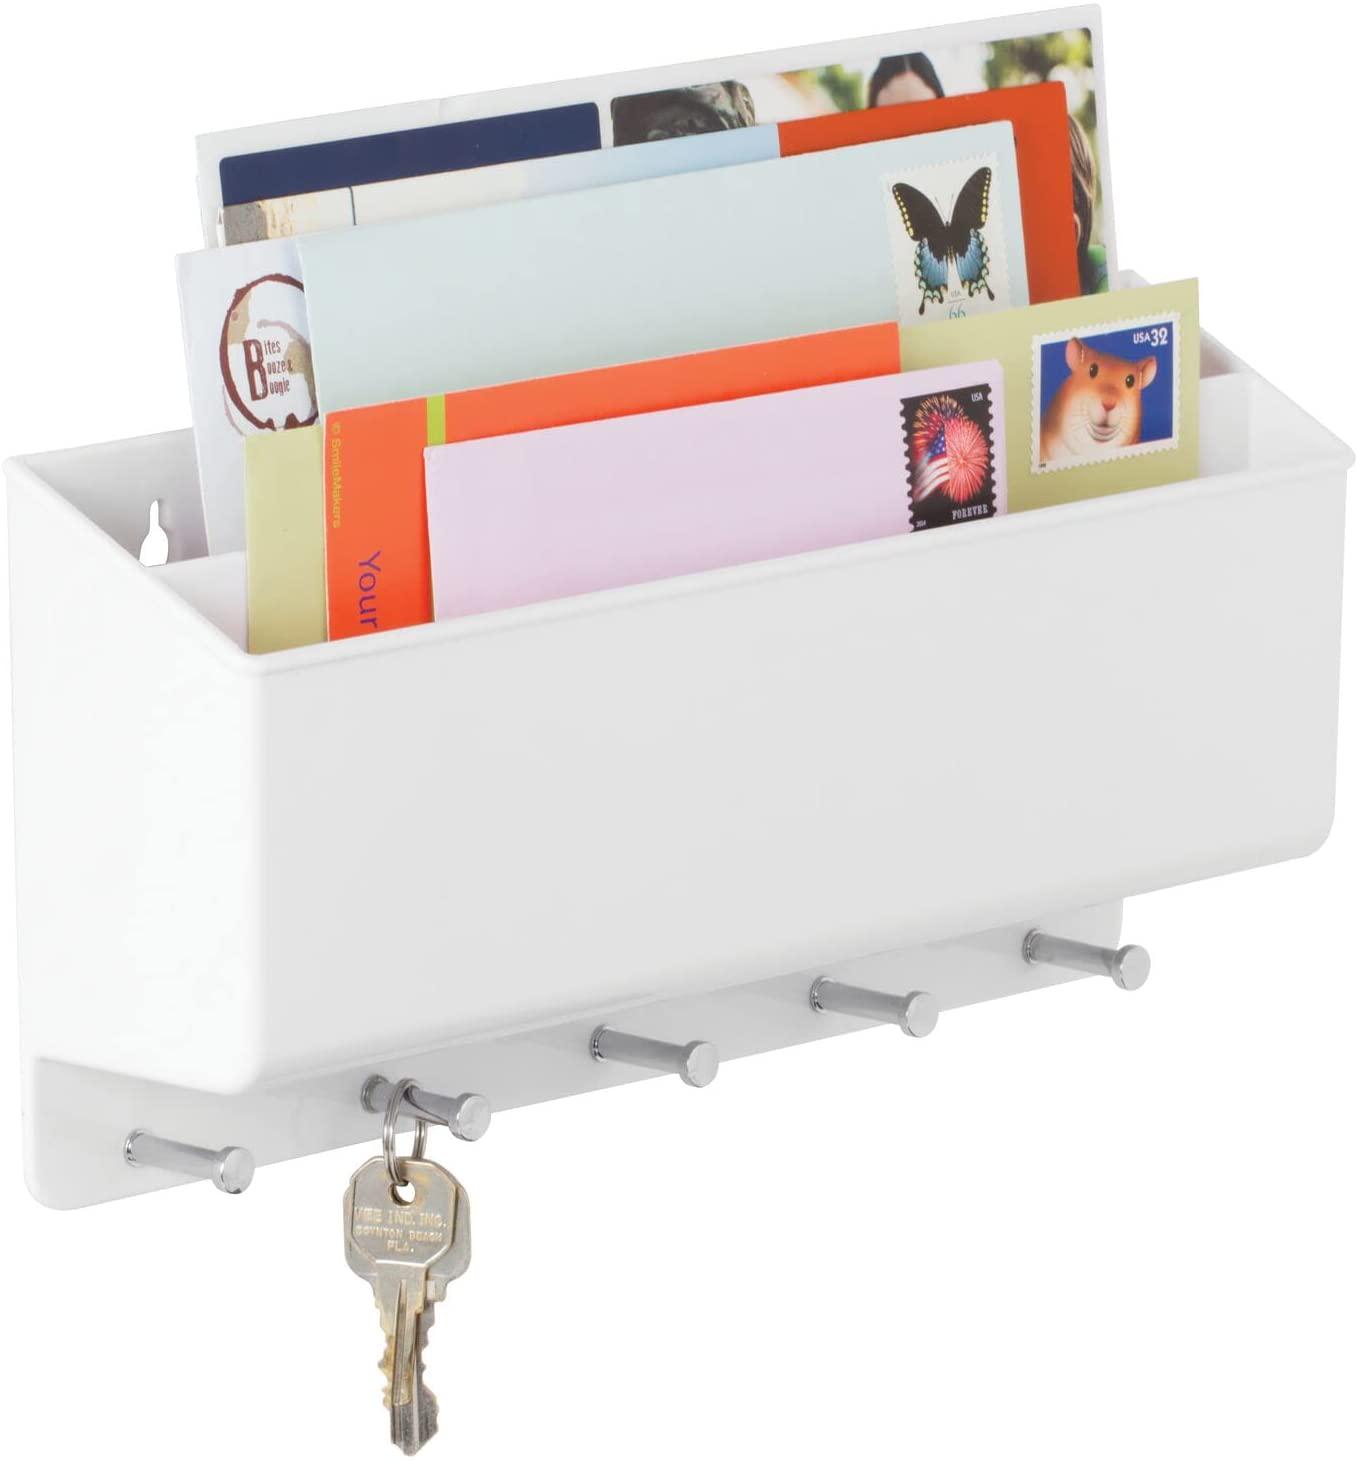 mDesign, mDesign Wall Mount Plastic Divided Mail Organizer Storage Basket - 2 Sections, 5 Metal Peg Hooks - for Entryway, Mudroom, Hallway, Kitchen, Office - Holds Letters, Magazines, Coats, Keys - White